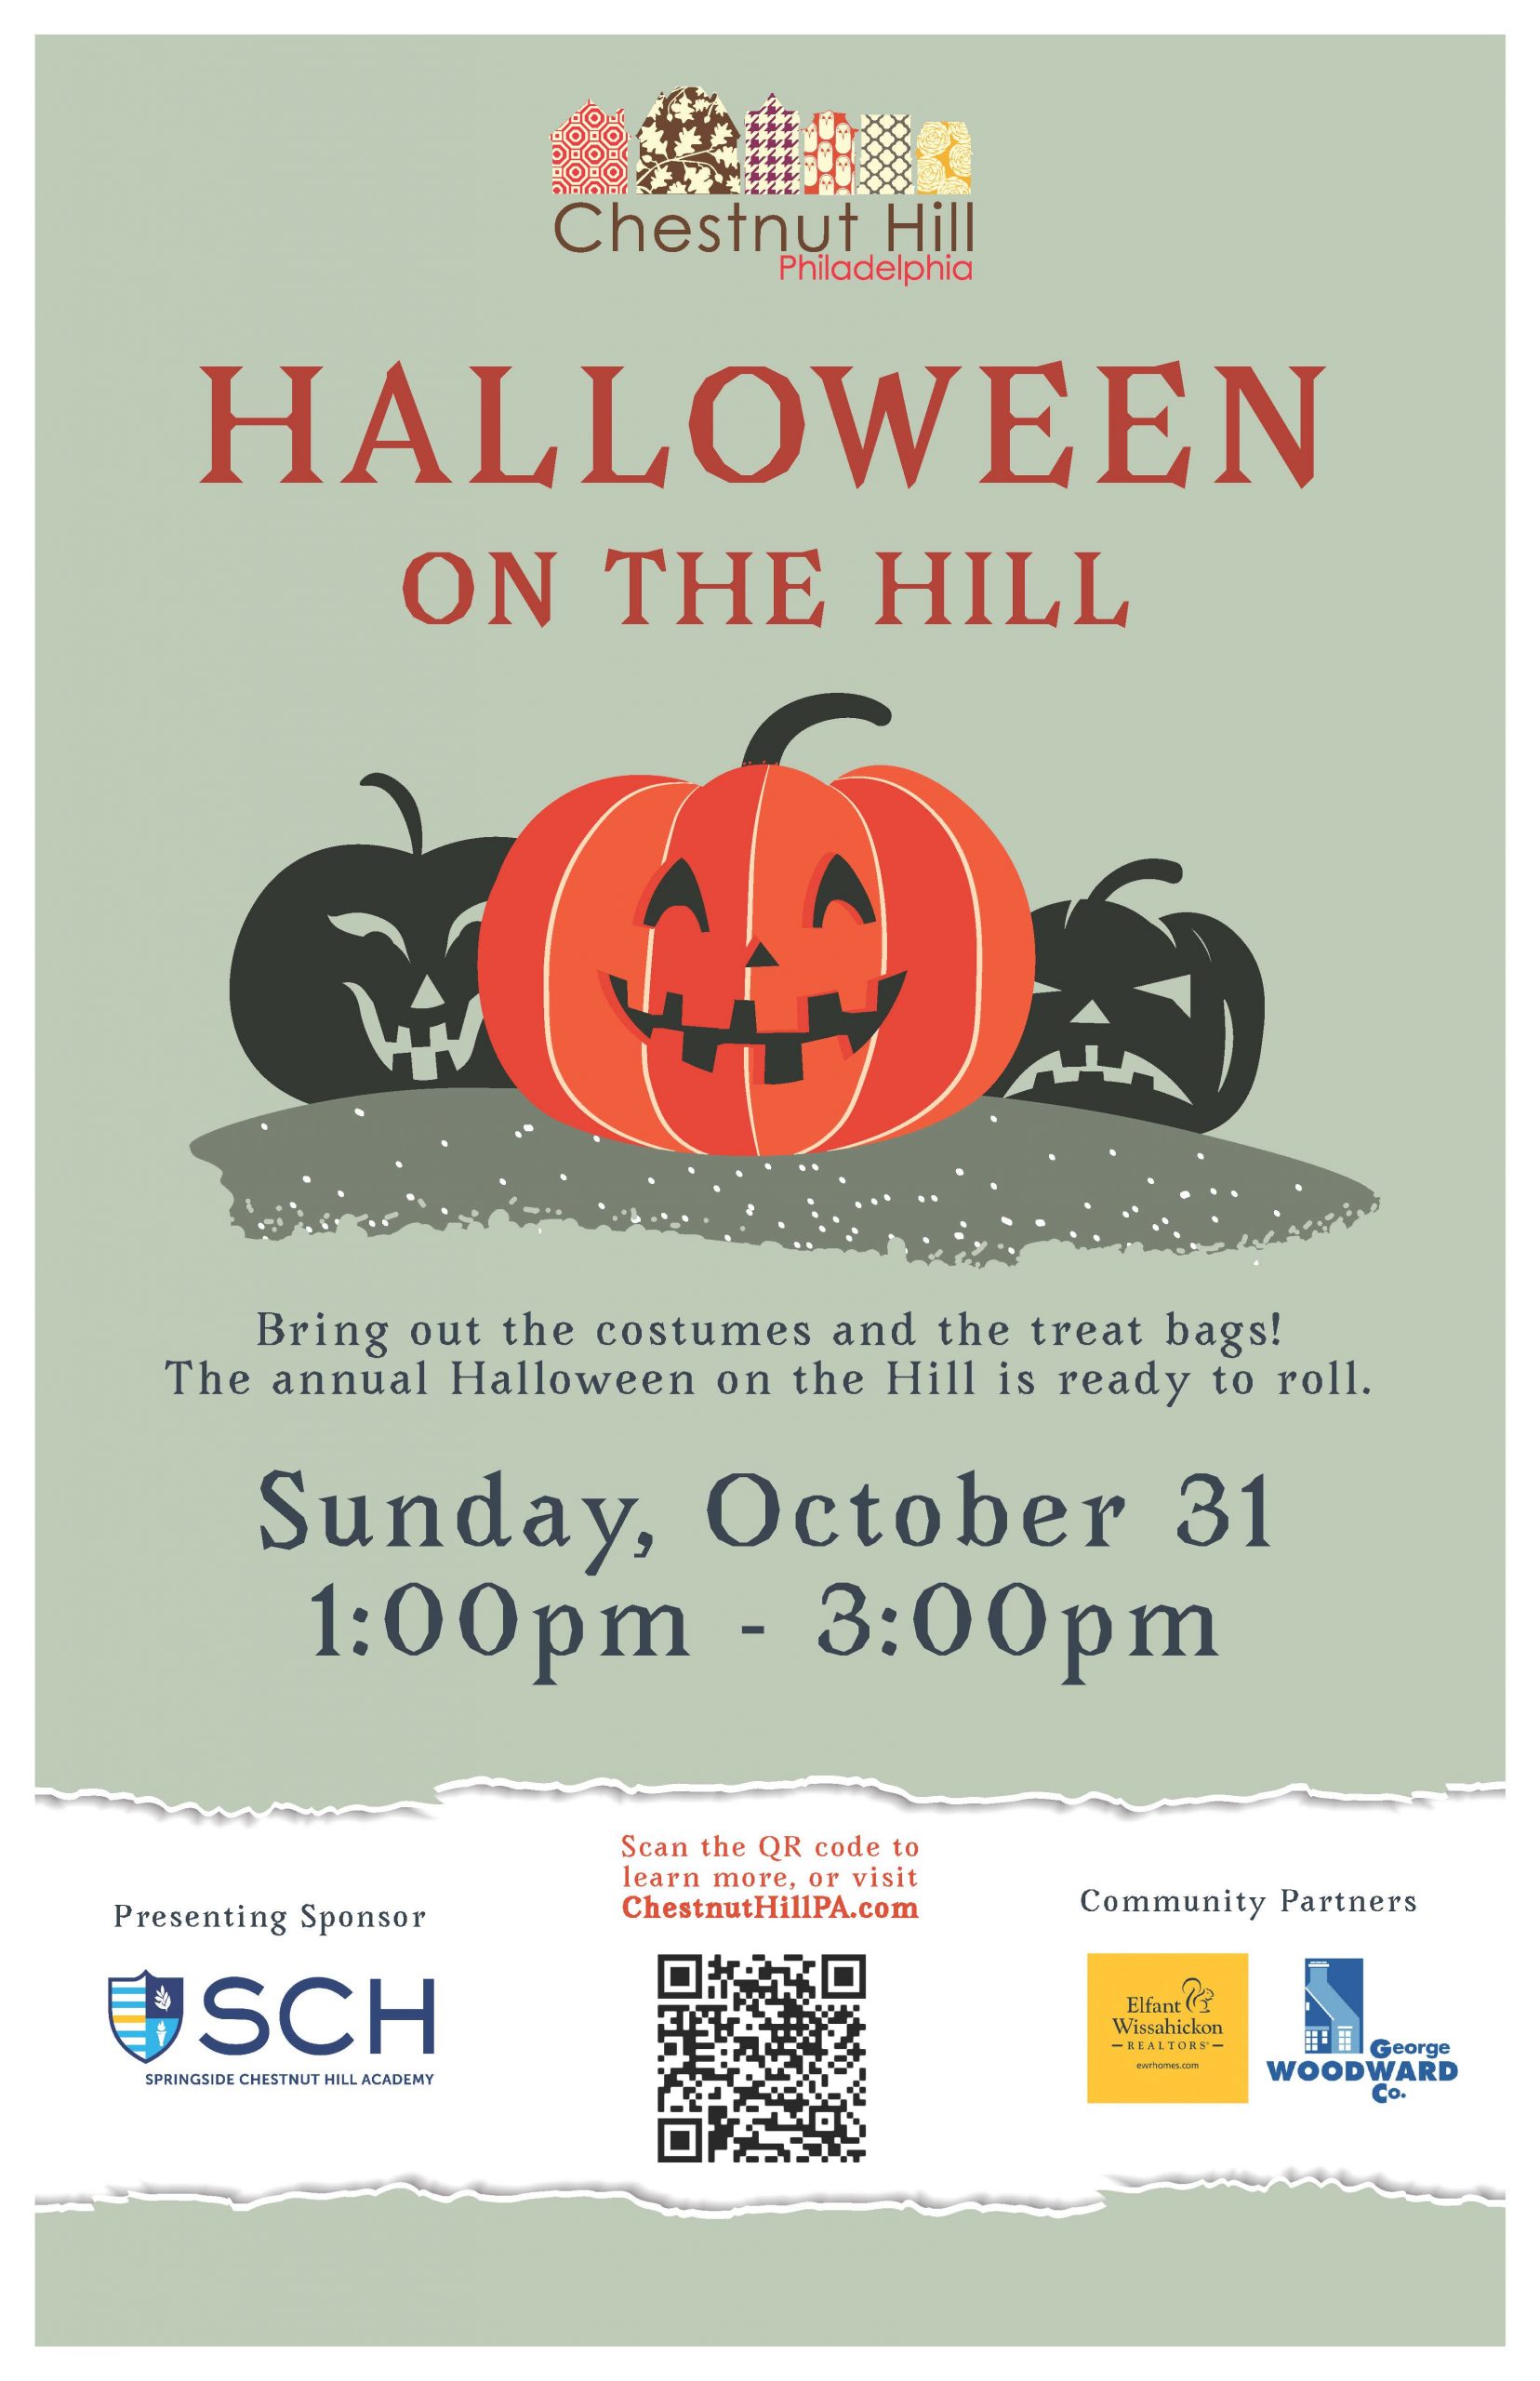 Halloween on the Hill 2021 Chestnut Hill